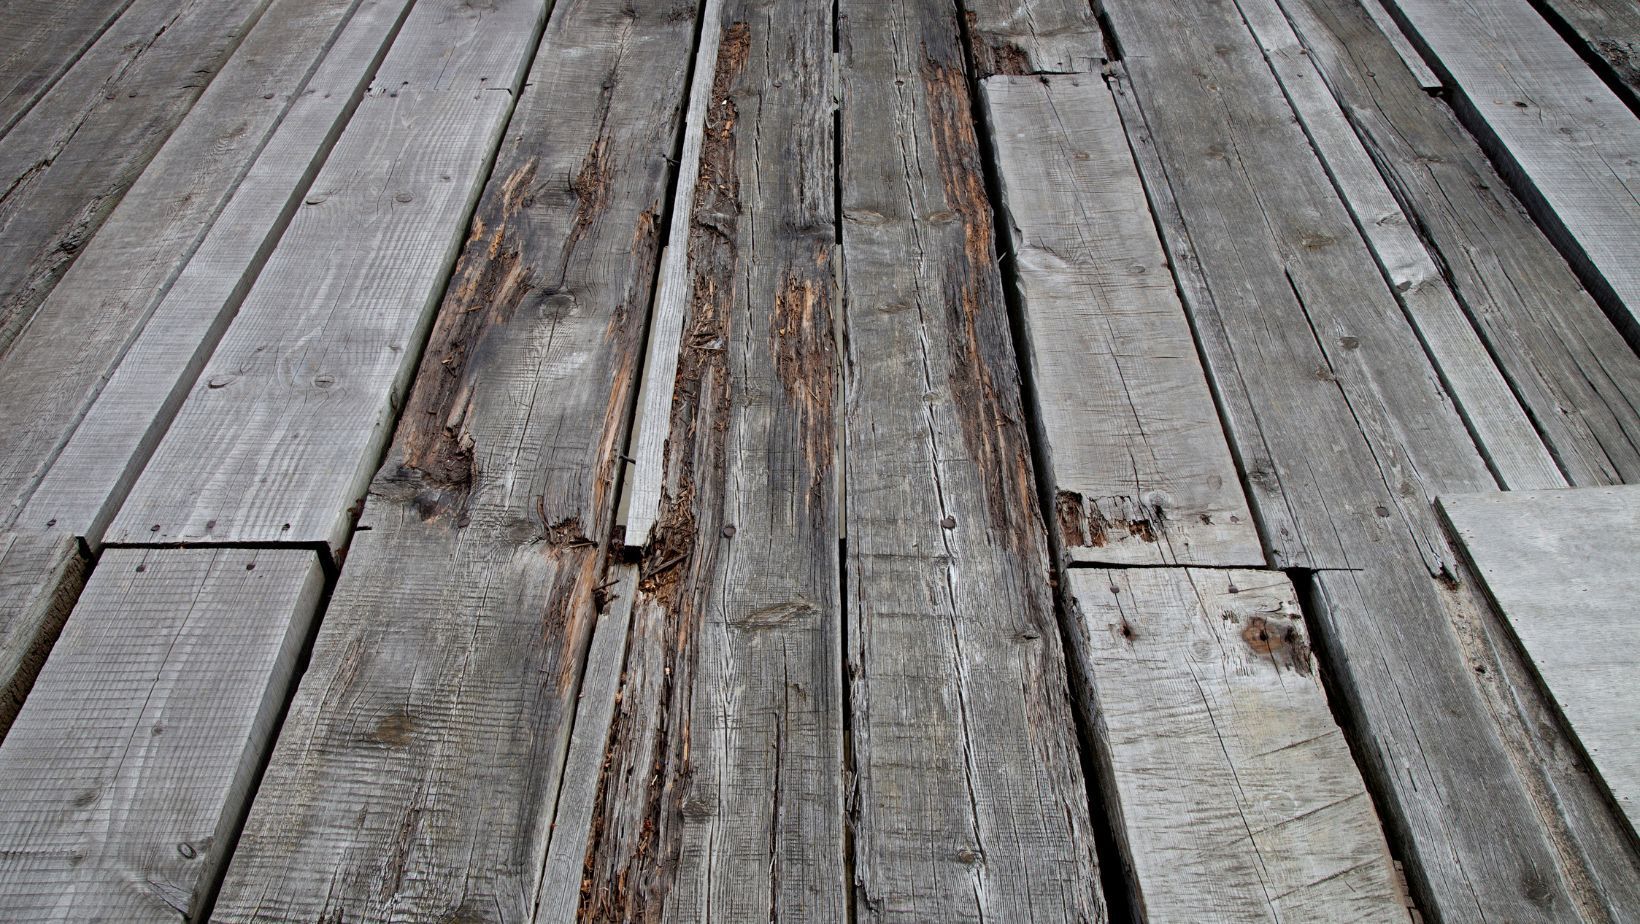 Rotted wood deck Kansas city